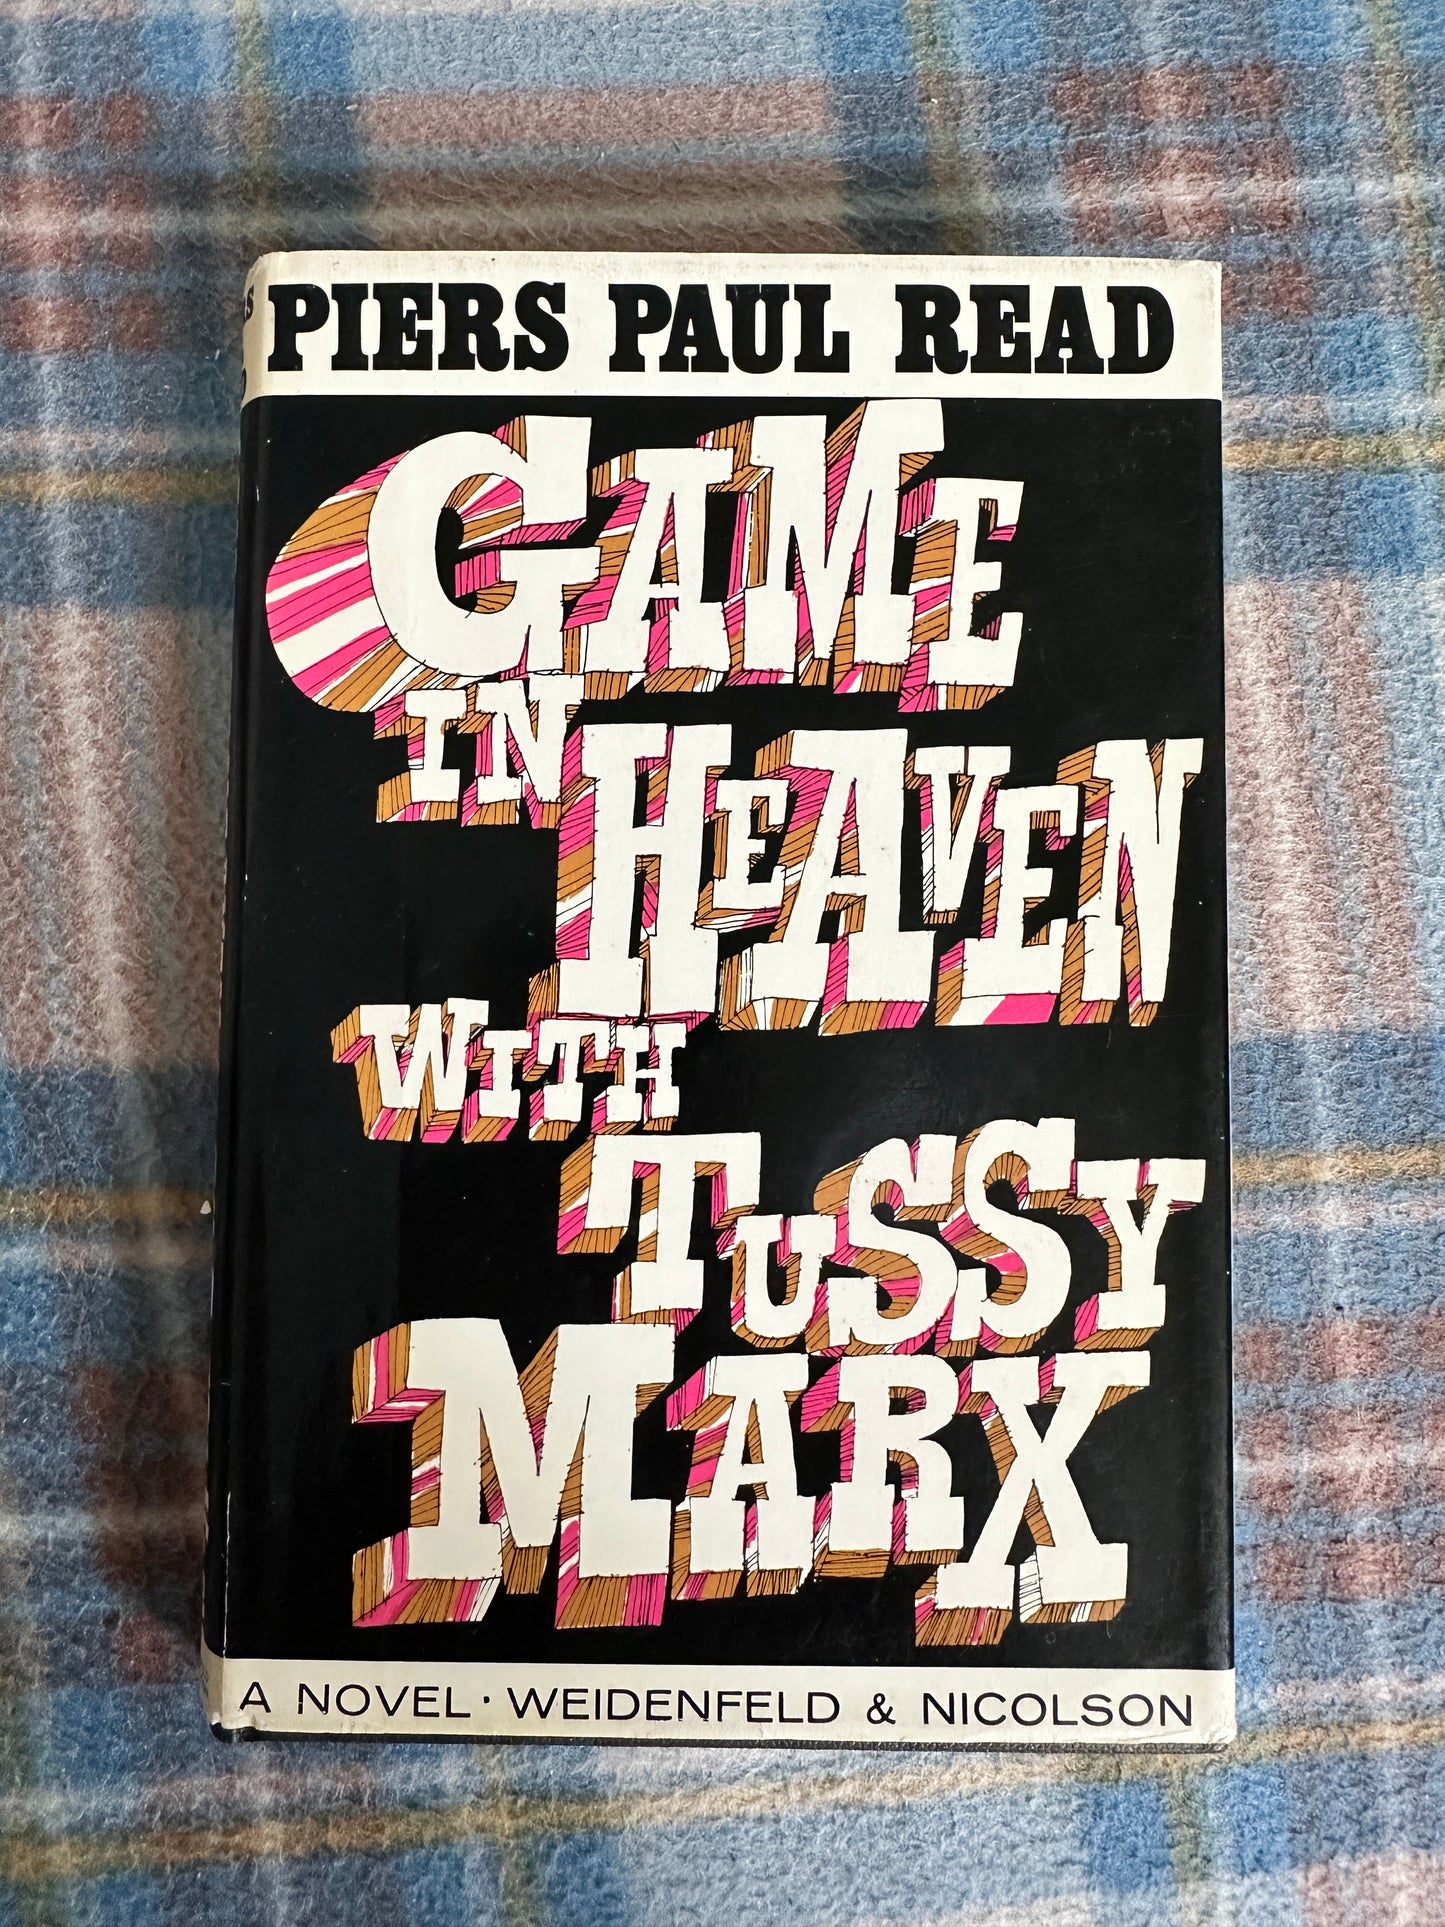 1966*1st* Game In Heaven With Tussy Marx - Piers Paul Read(Weidenfeld and Nicolson)